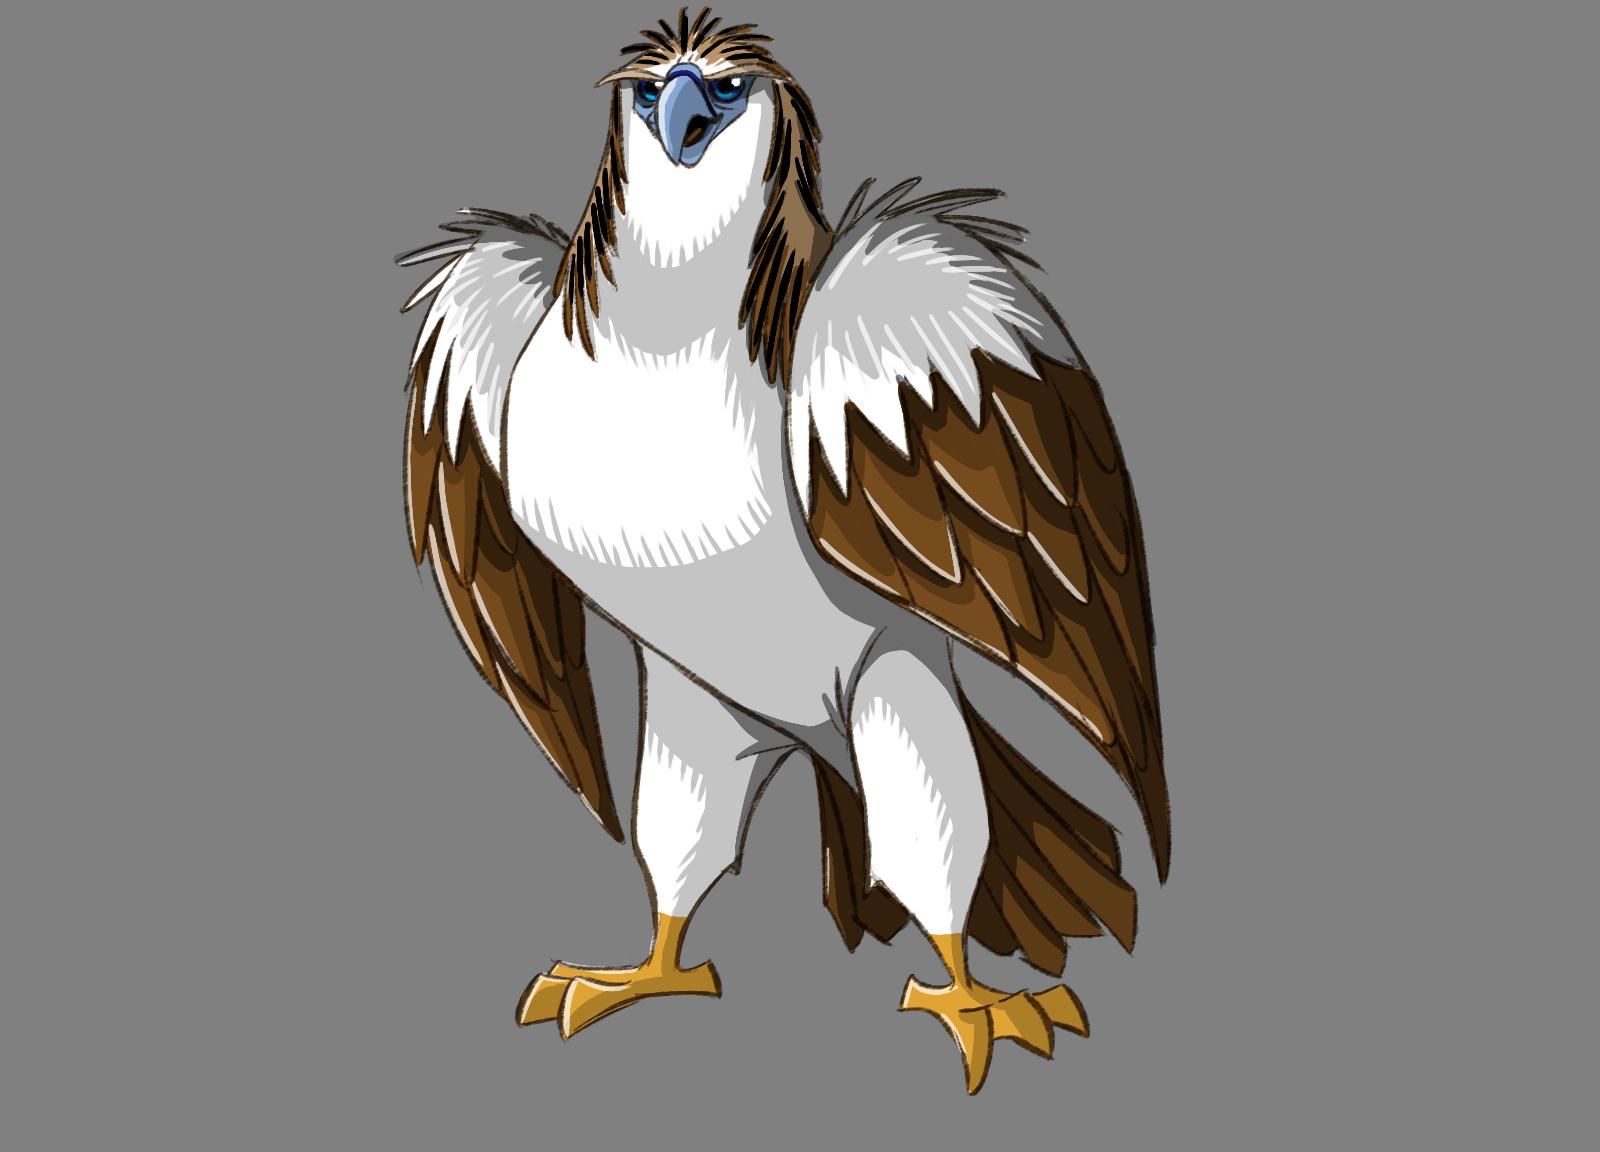 joma santiago: Eagle and Owl character designs